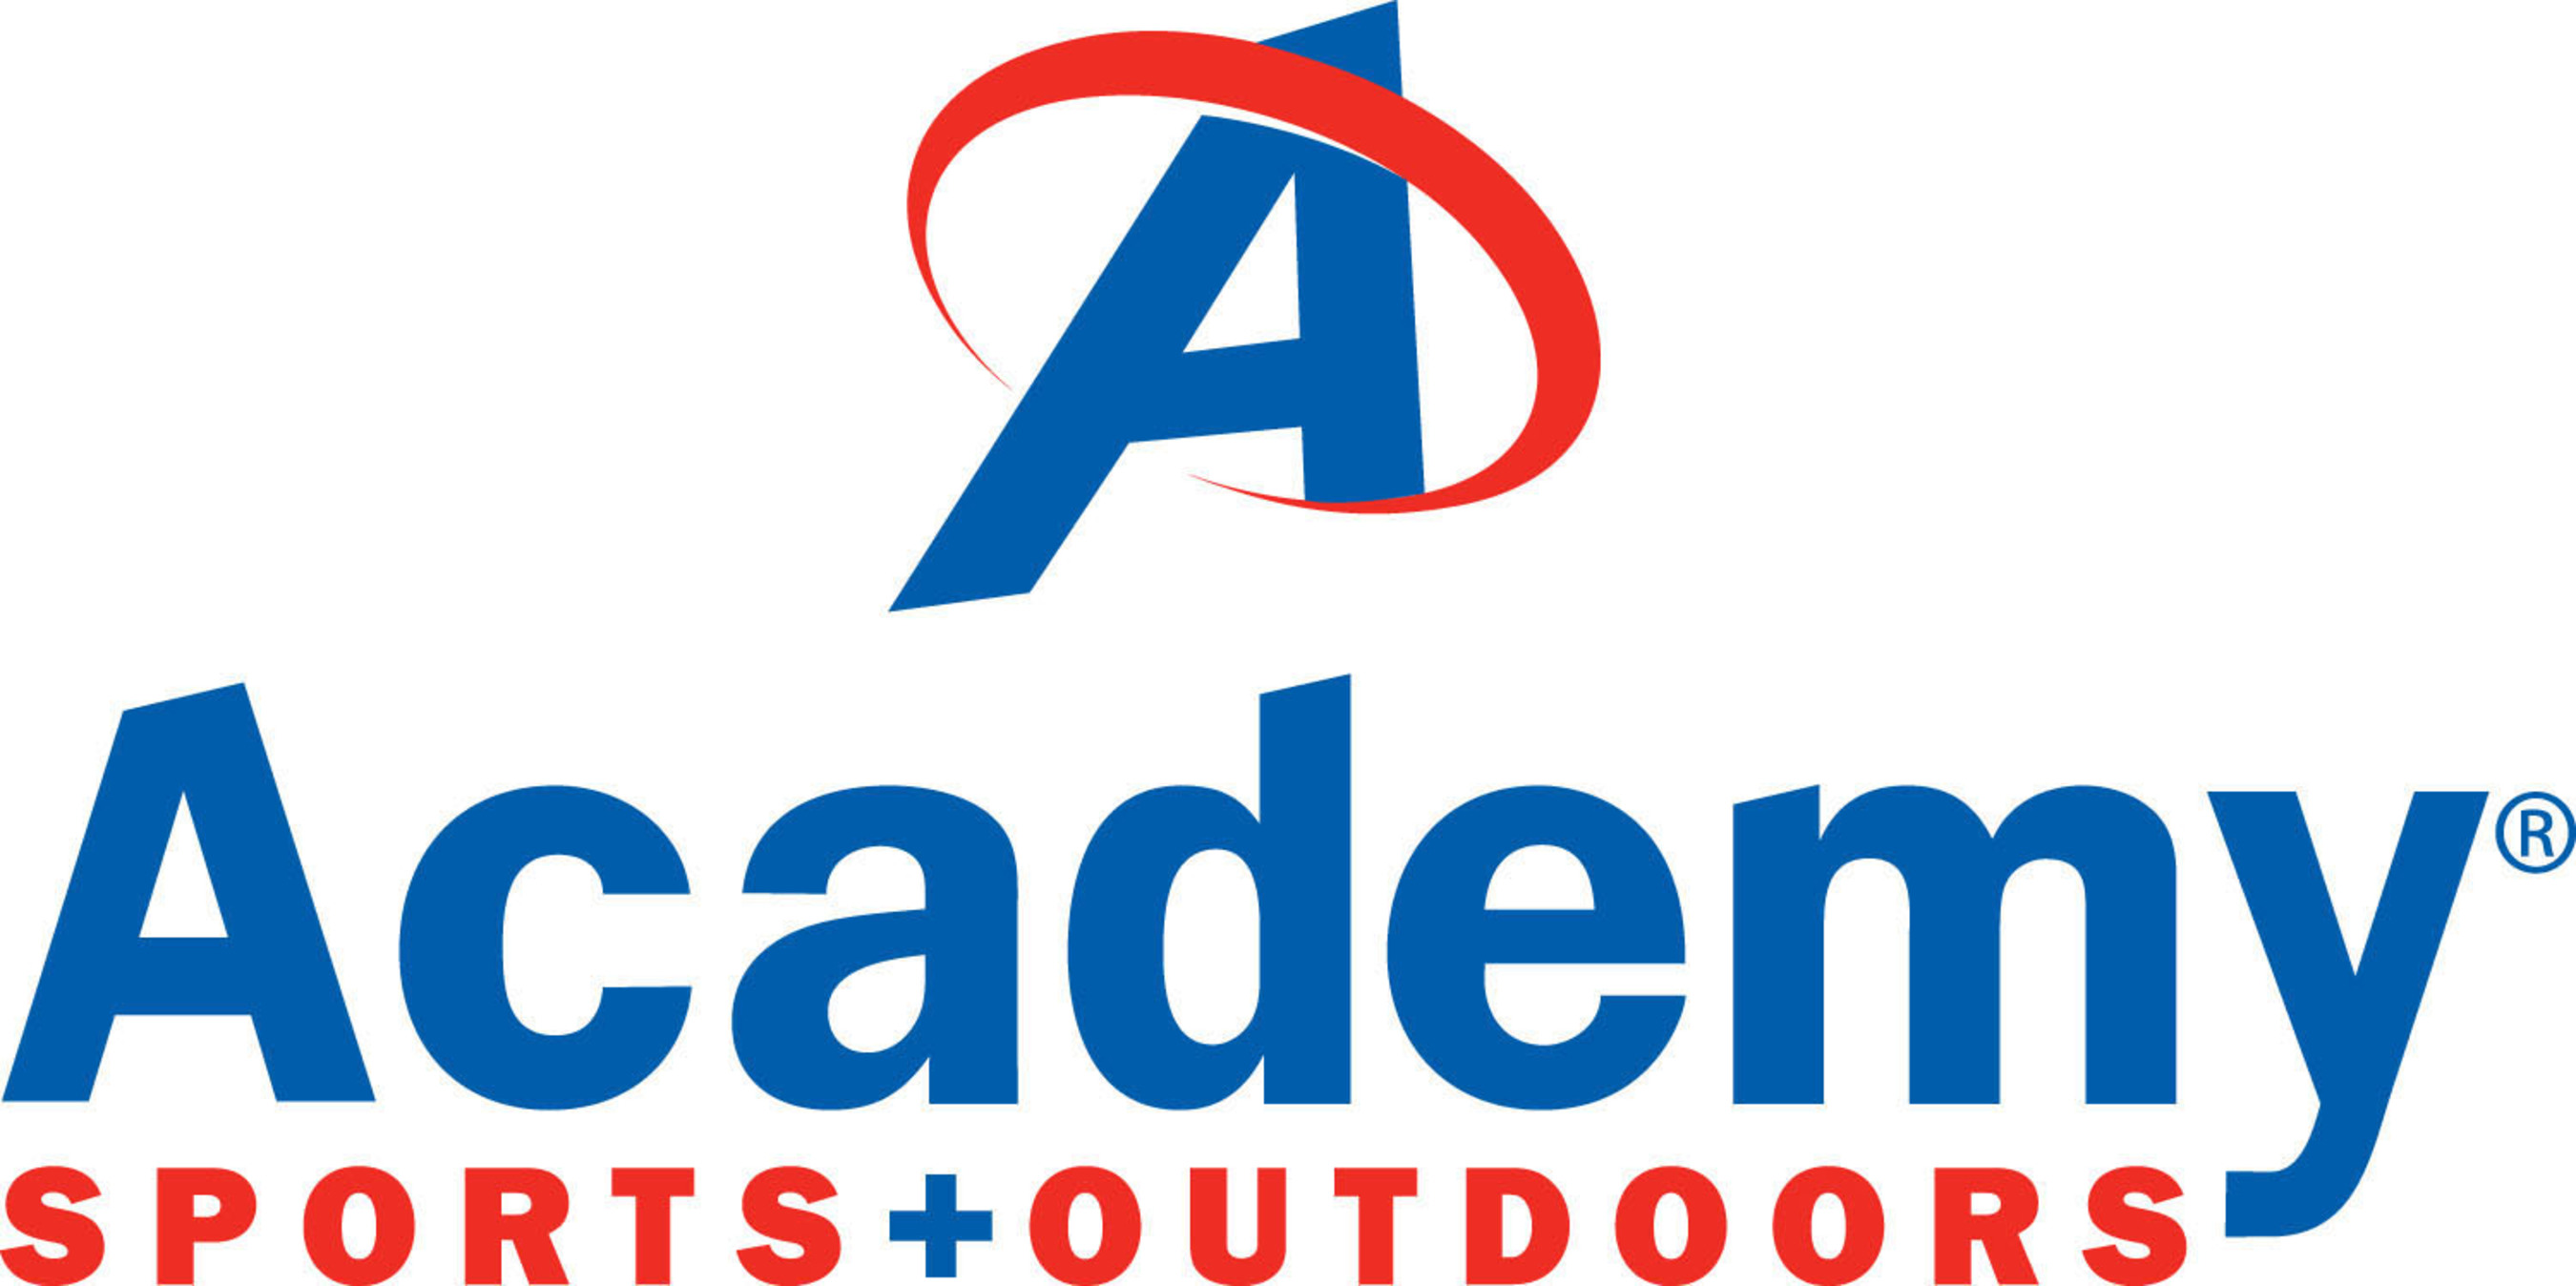 Academy Sports + Outdoors announces multi-year partnership with